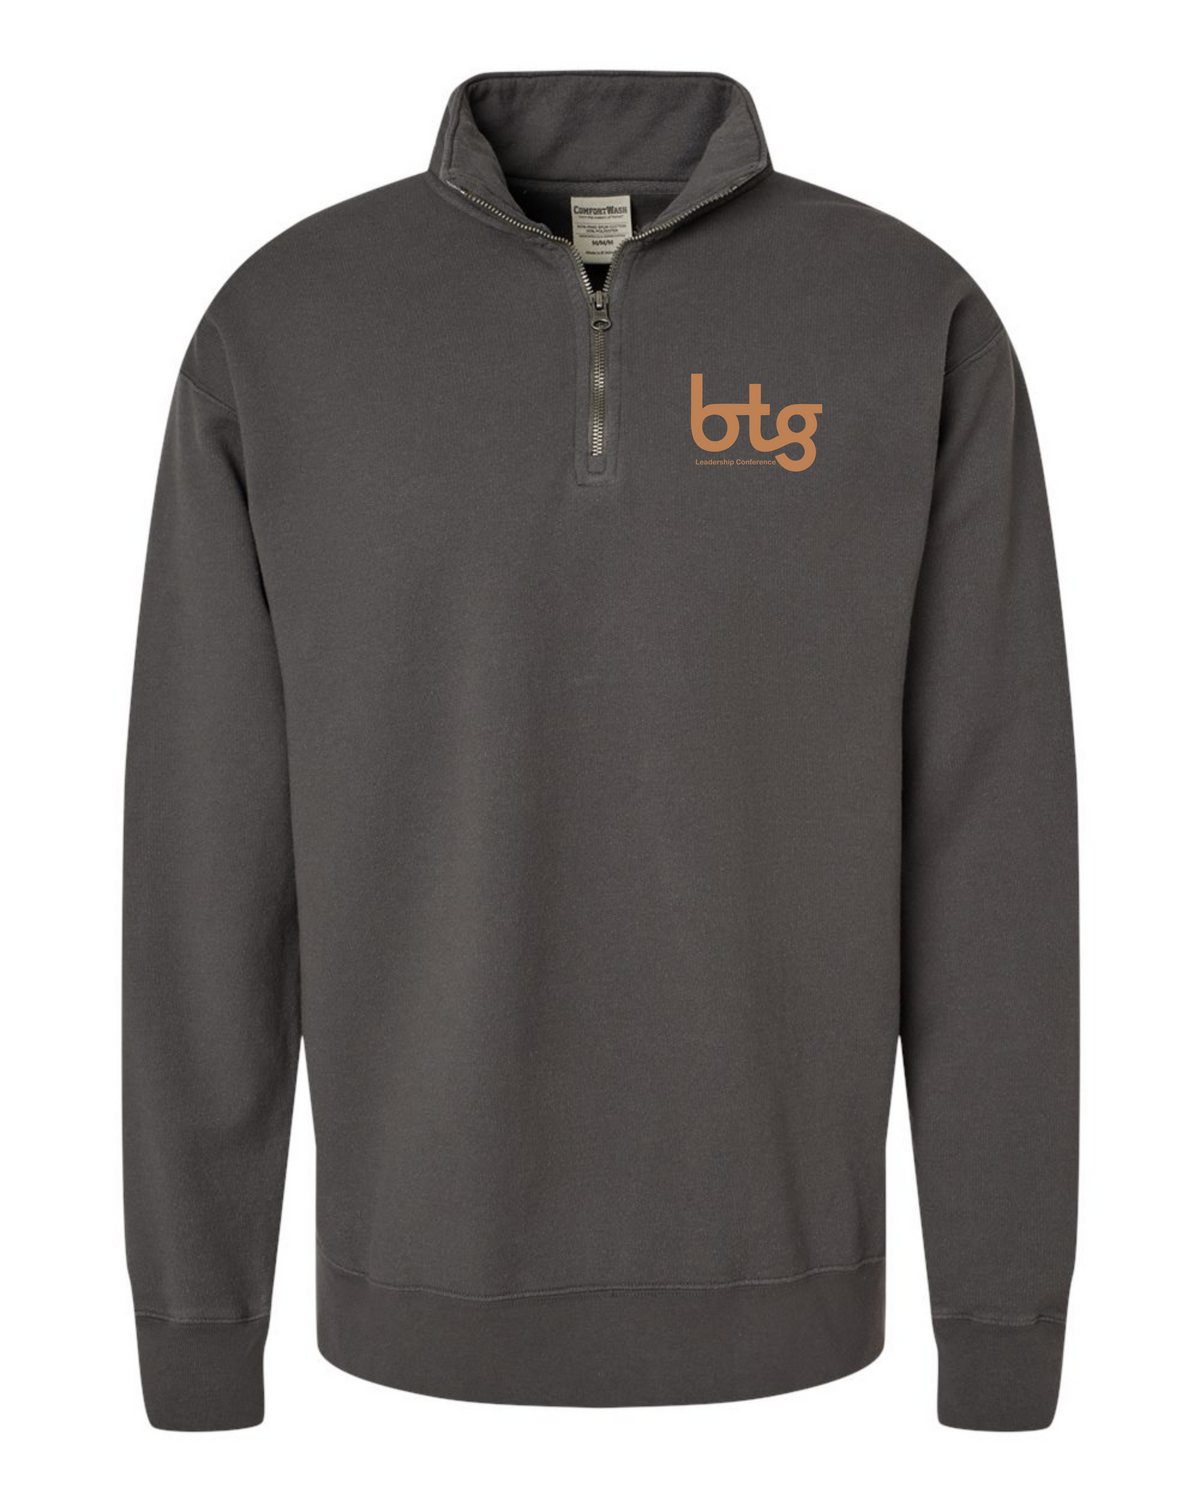 Bridging the Gap Leadership Conference Zip Pullover - FREE SHIPPING